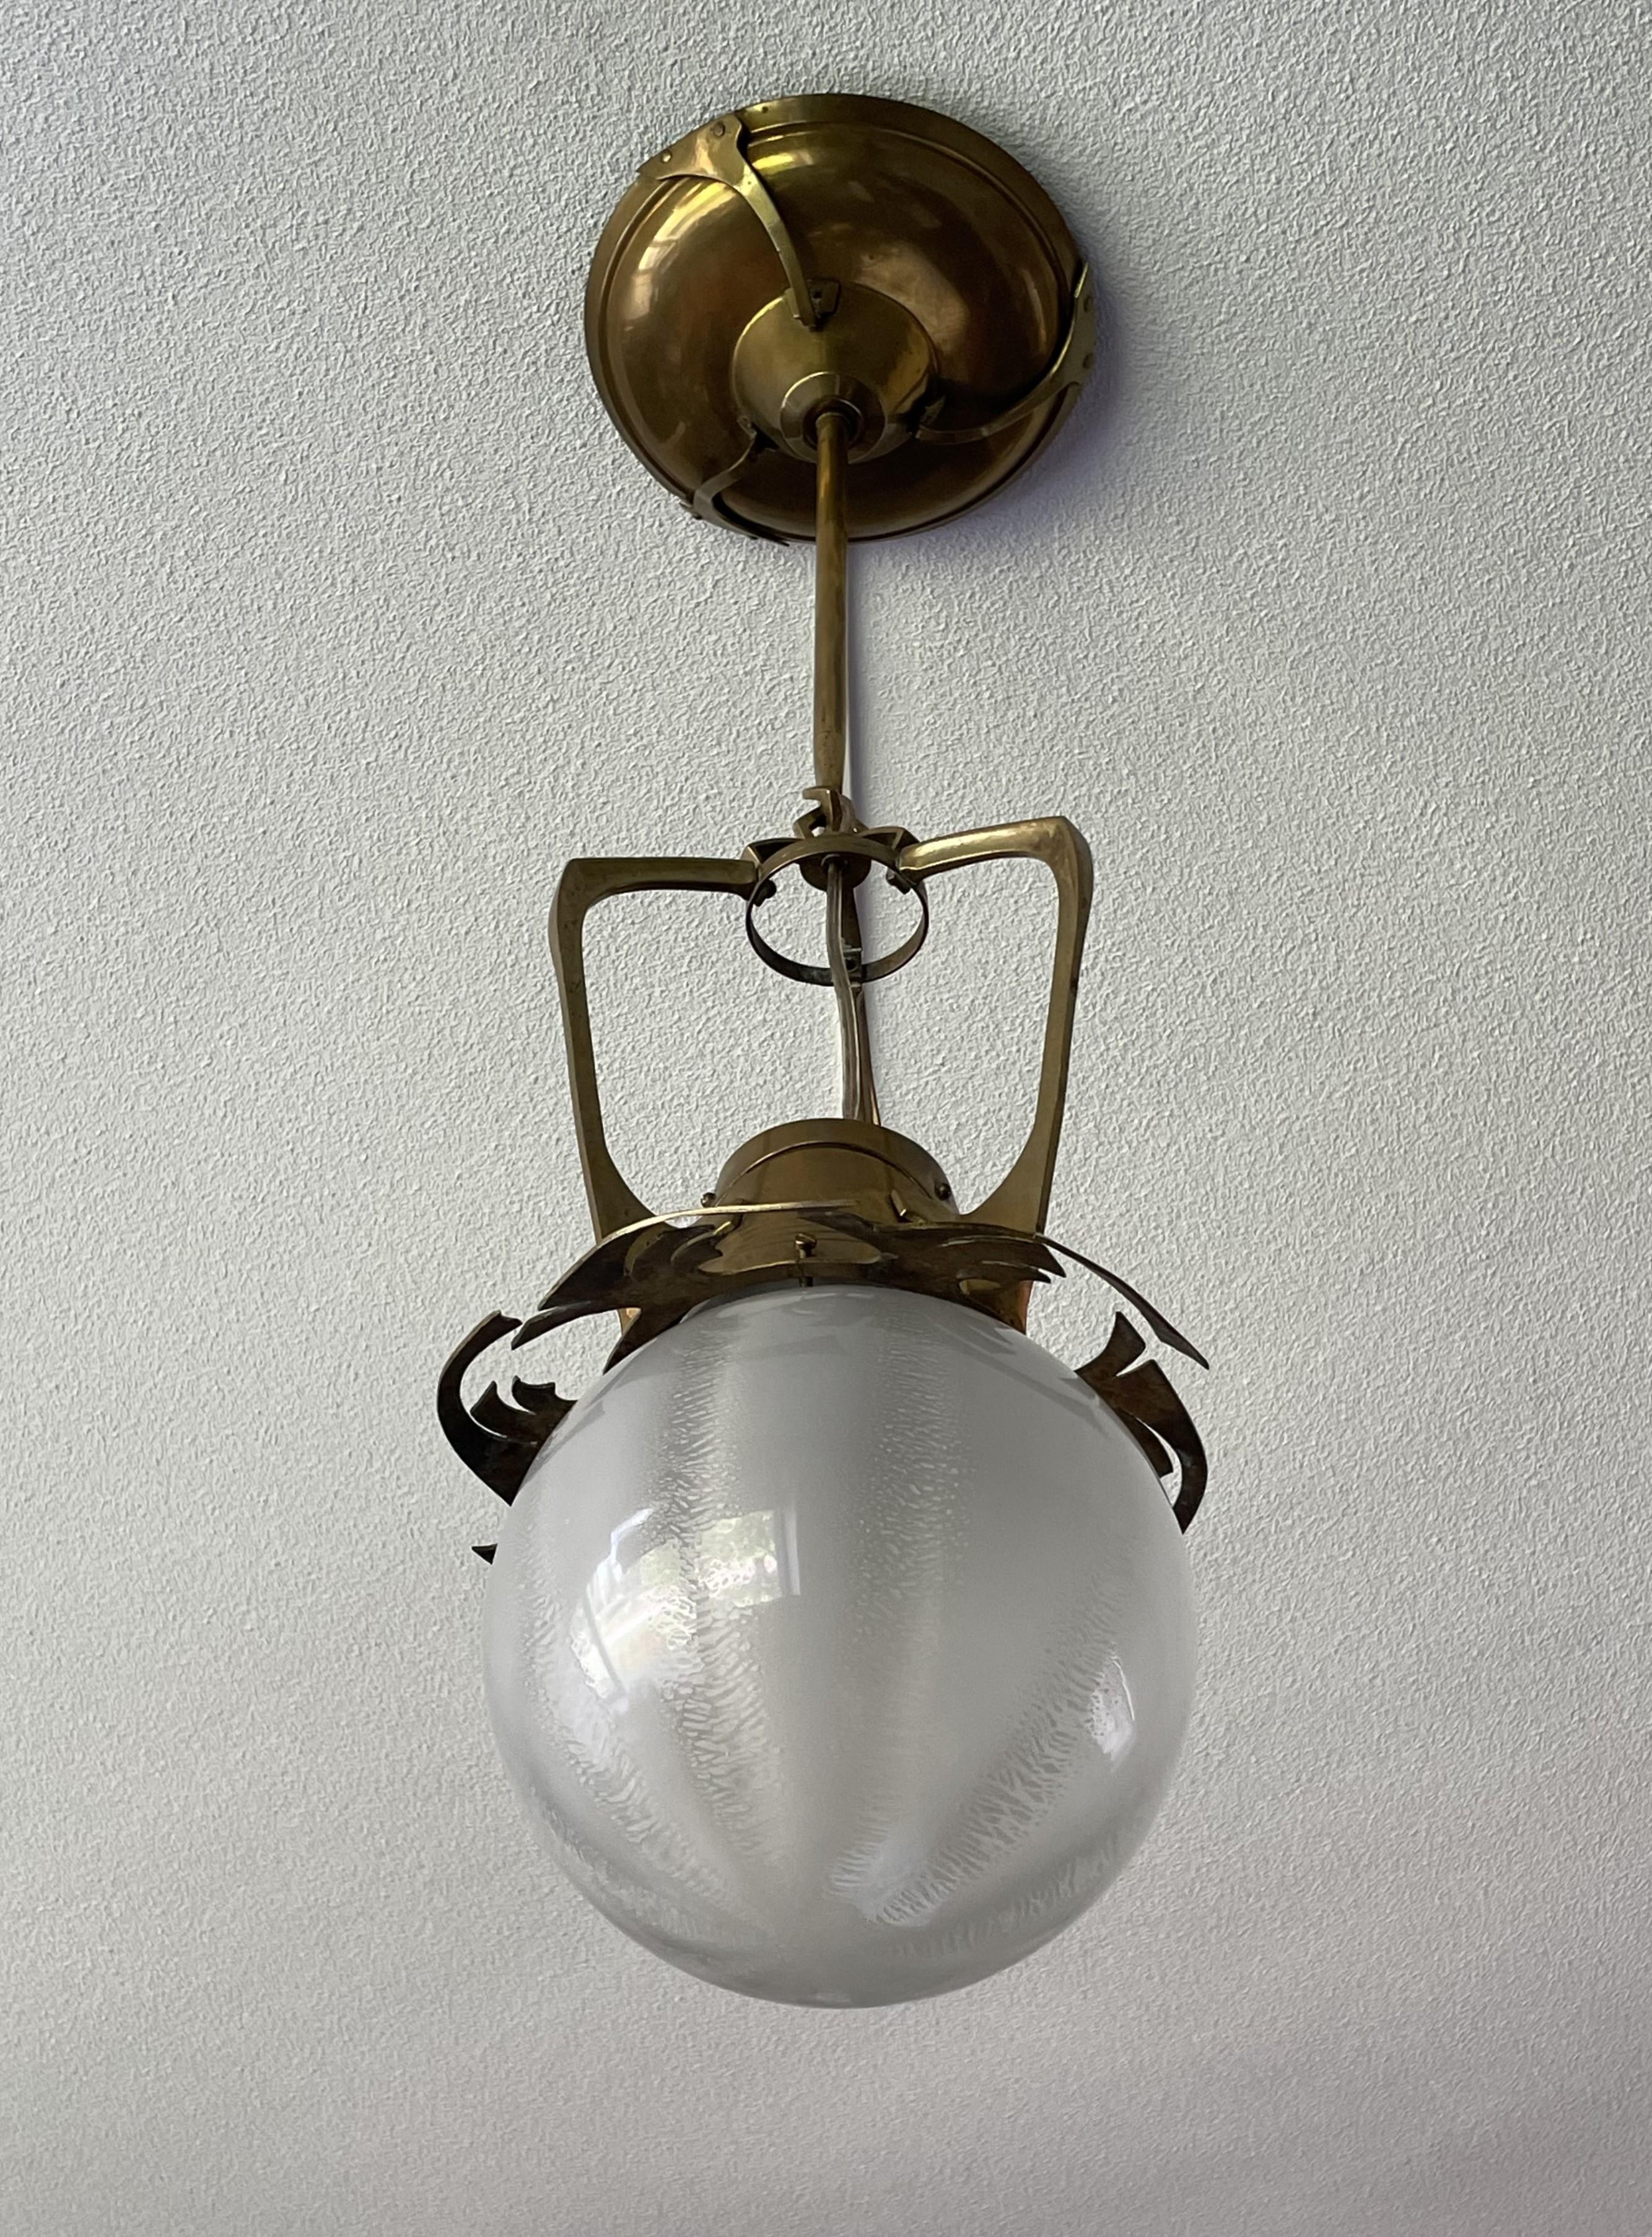 20th Century Unique Dutch Arts & Crafts Brass Pendant Light With Rare Tin Crackle Globe Shade For Sale